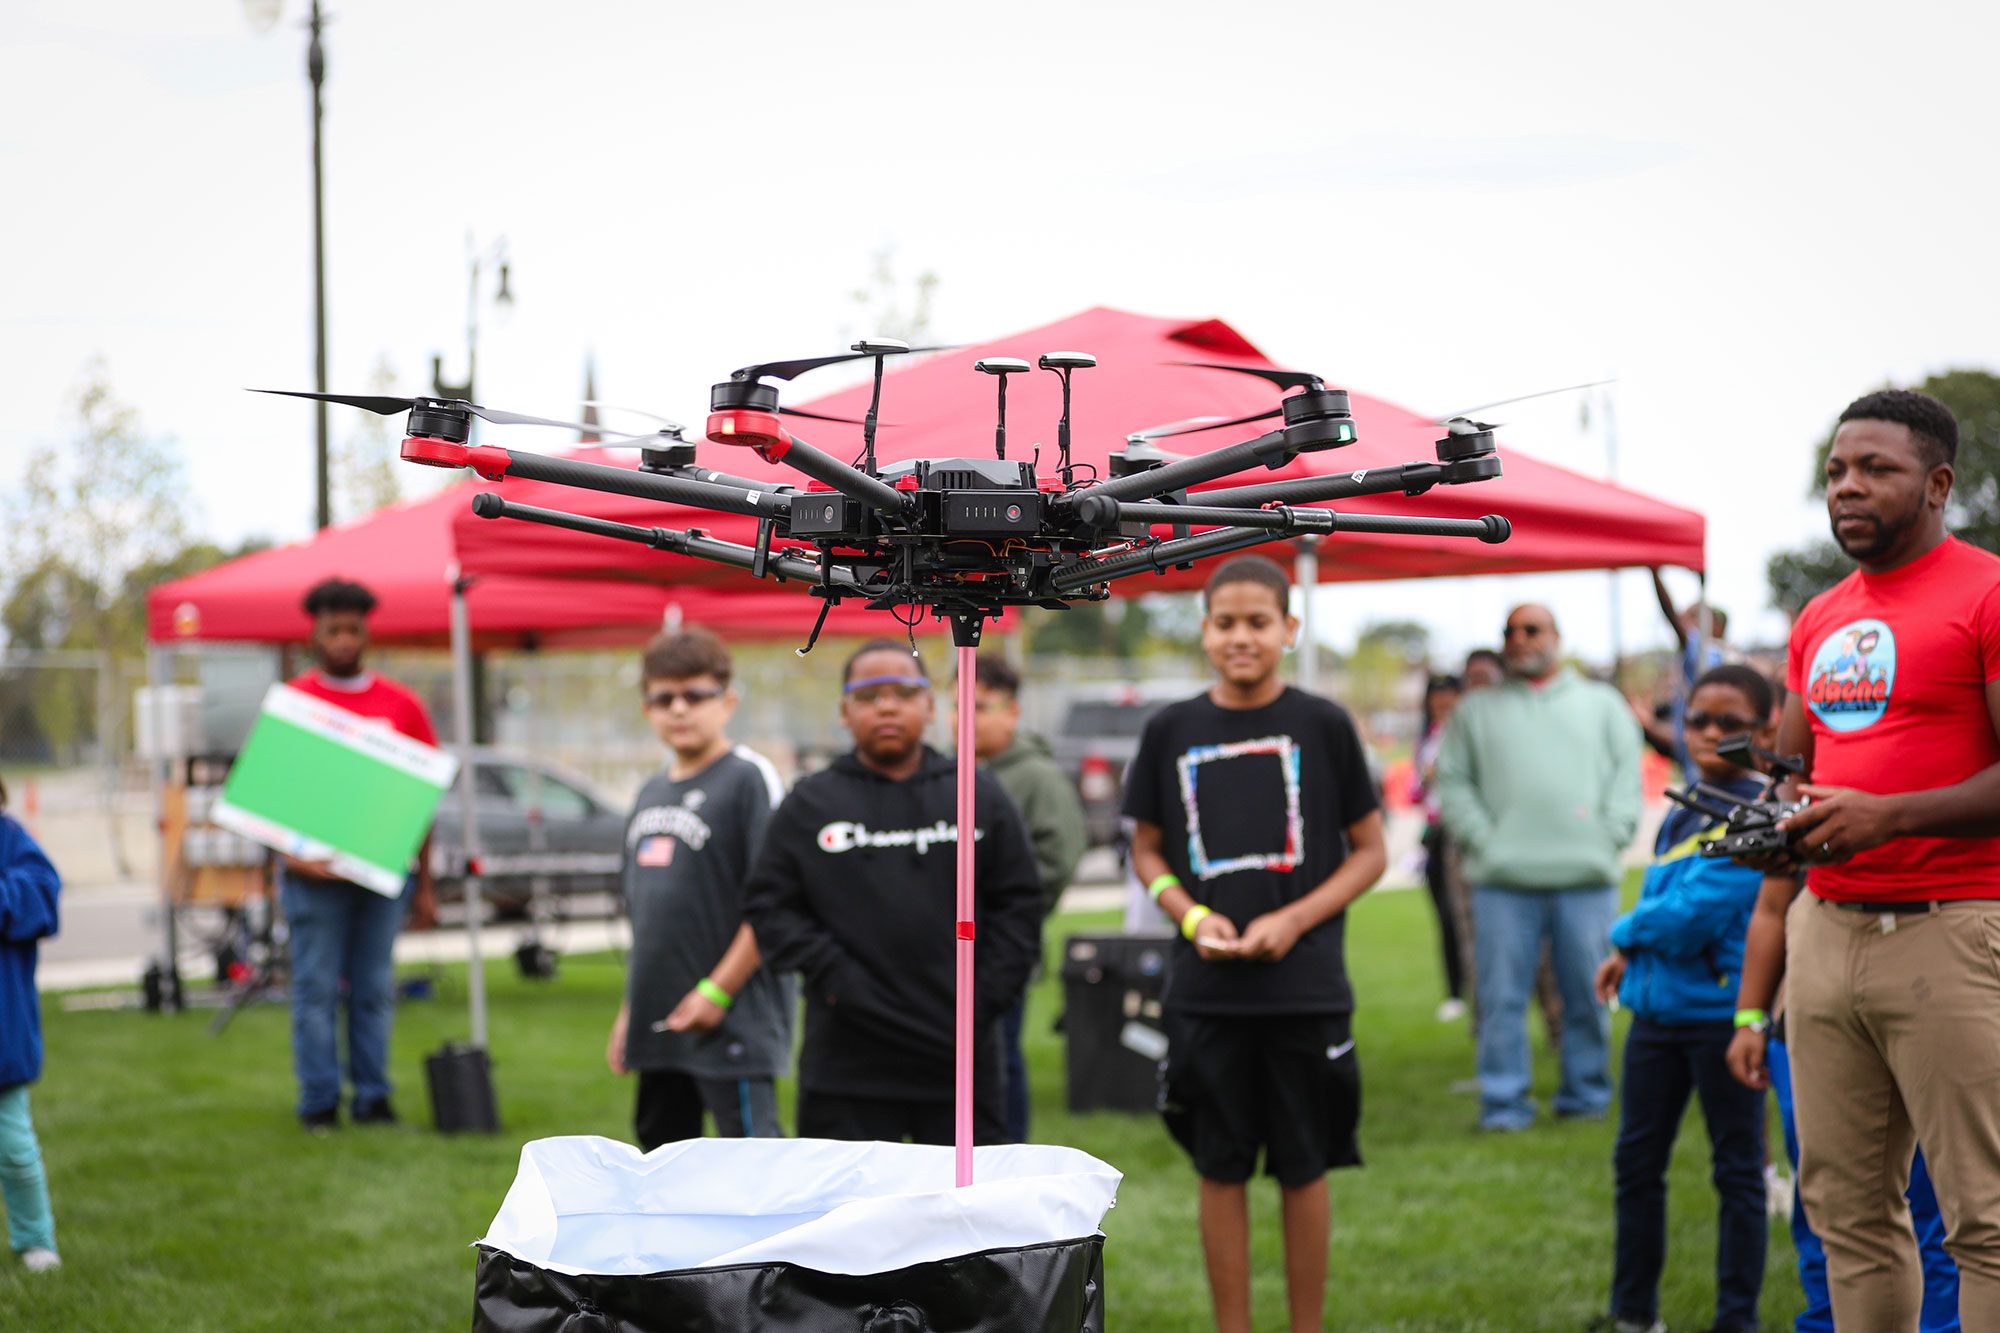 A group of children standby during a Drone operating demonstration.